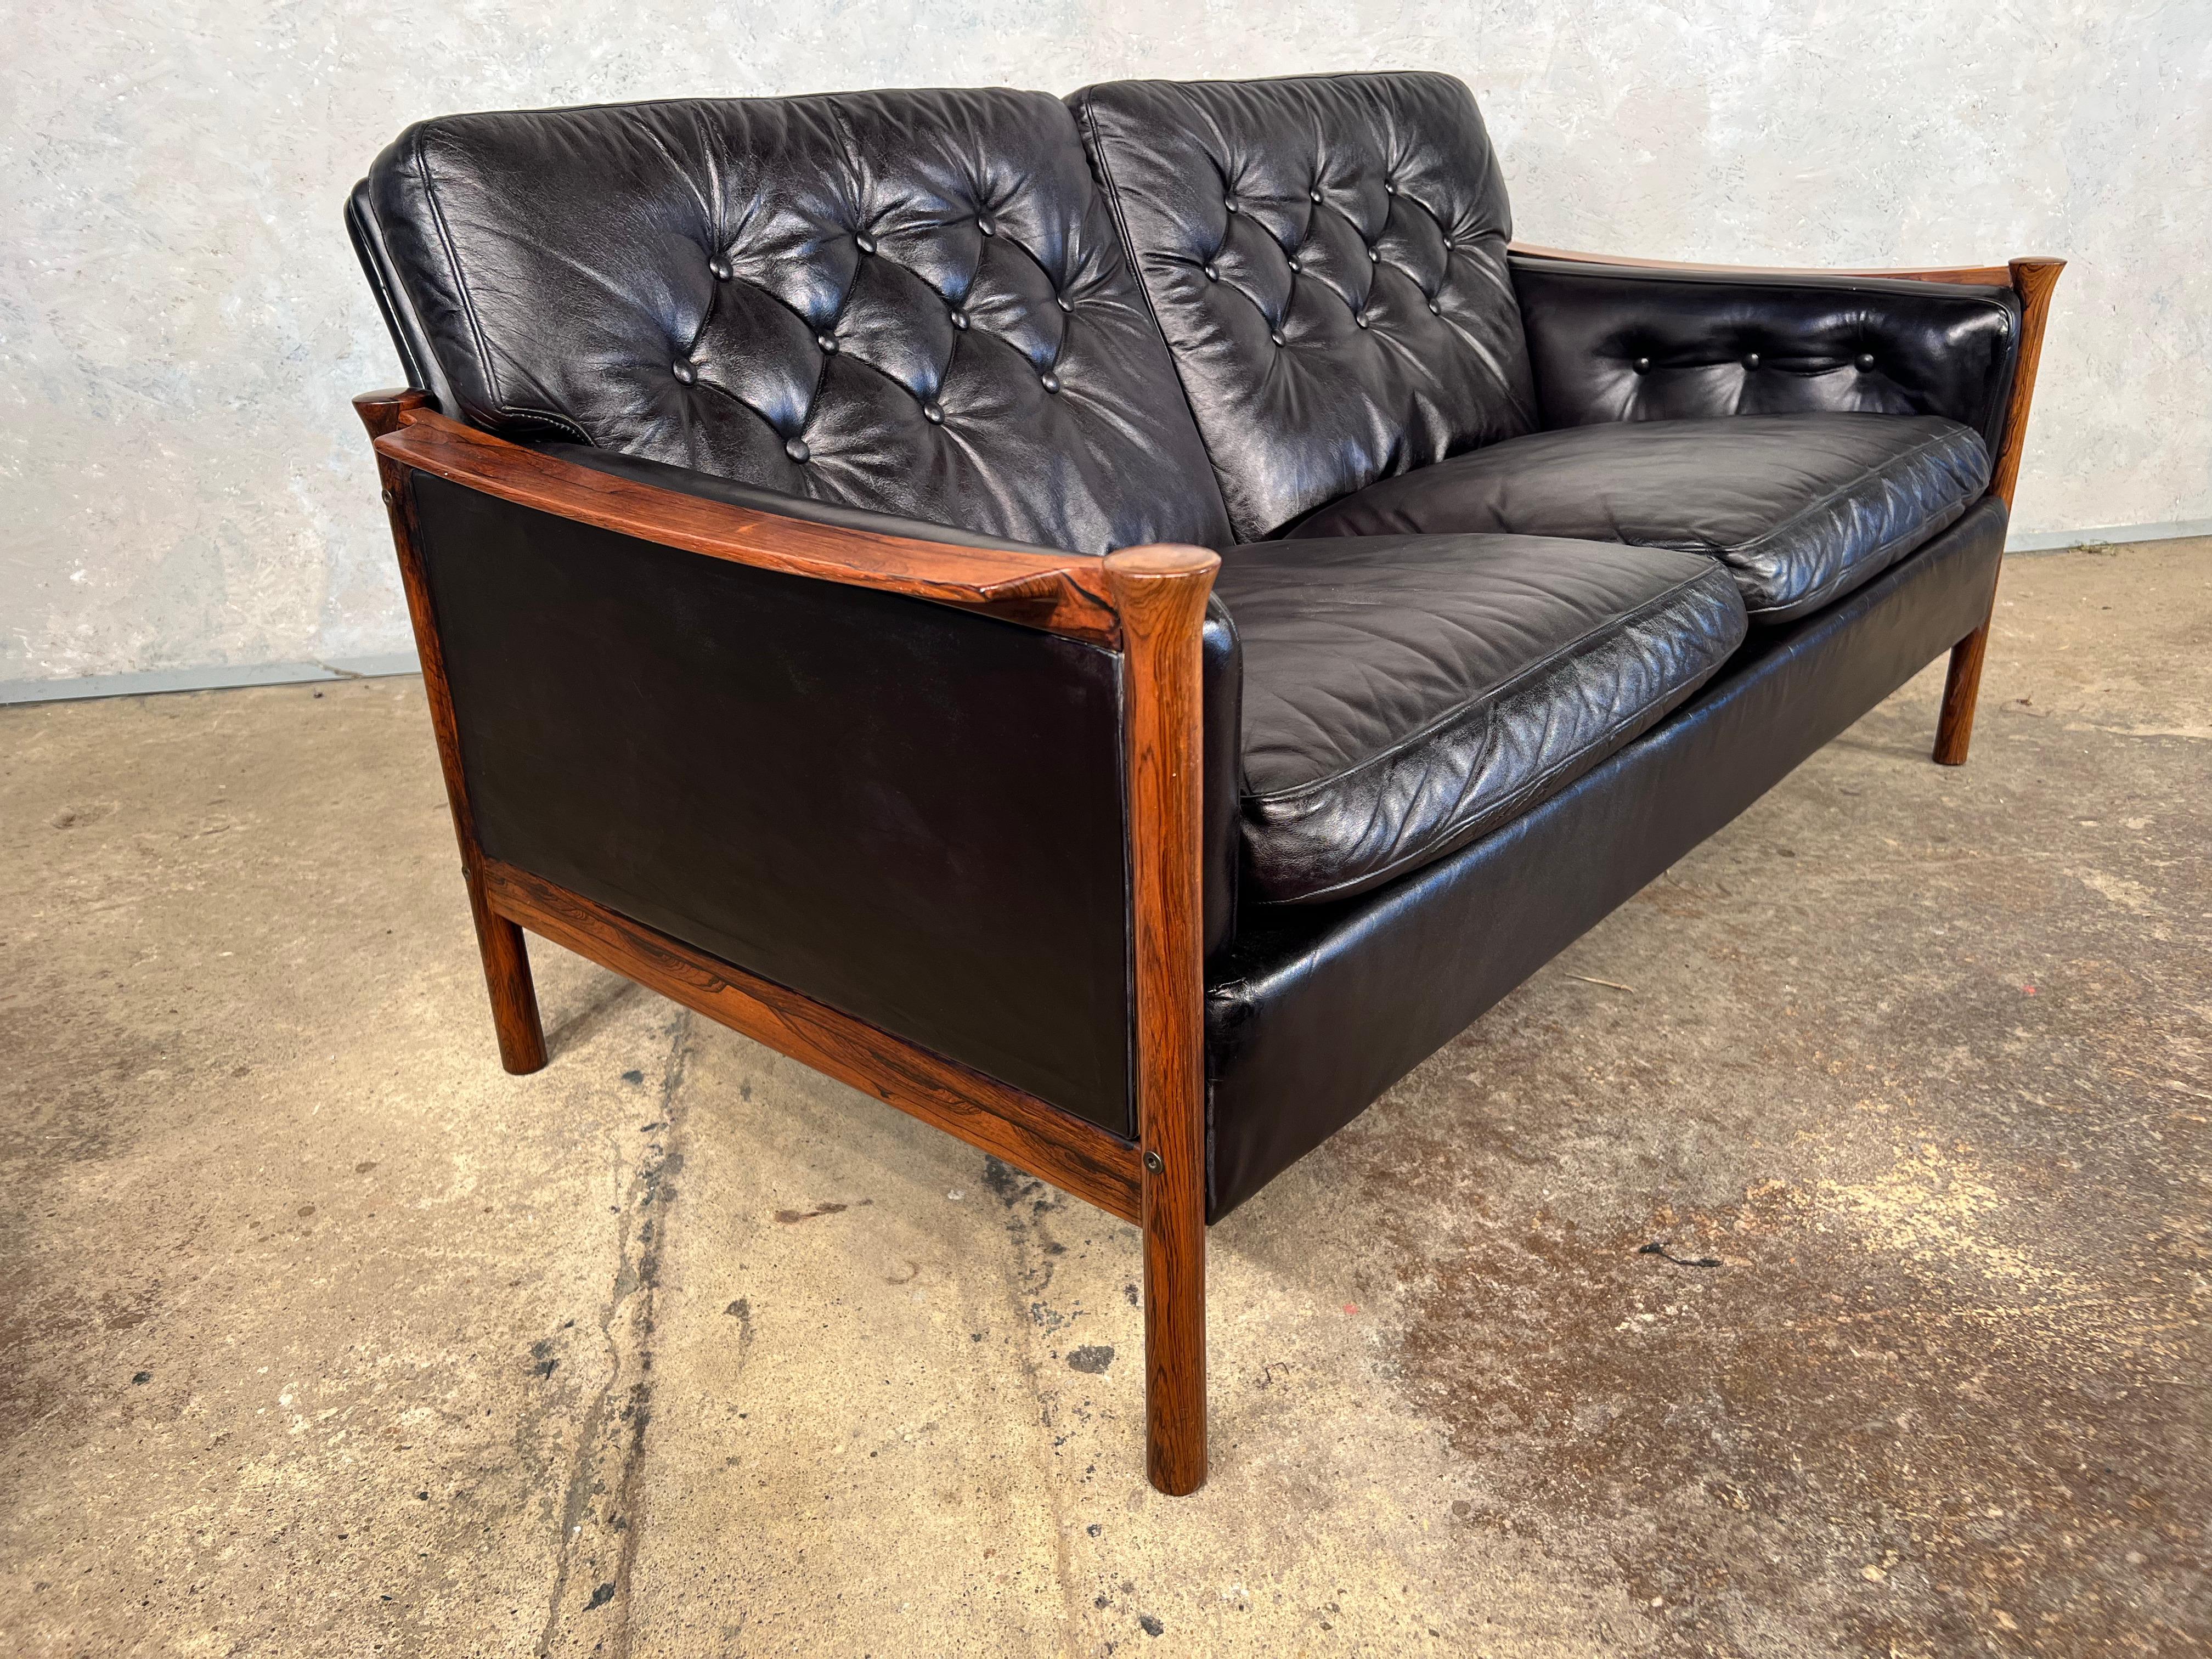 V Neat Two Seater Sofa in Leather by Torbjørn Afdal for Bruksbo Norway 70s #515 For Sale 1